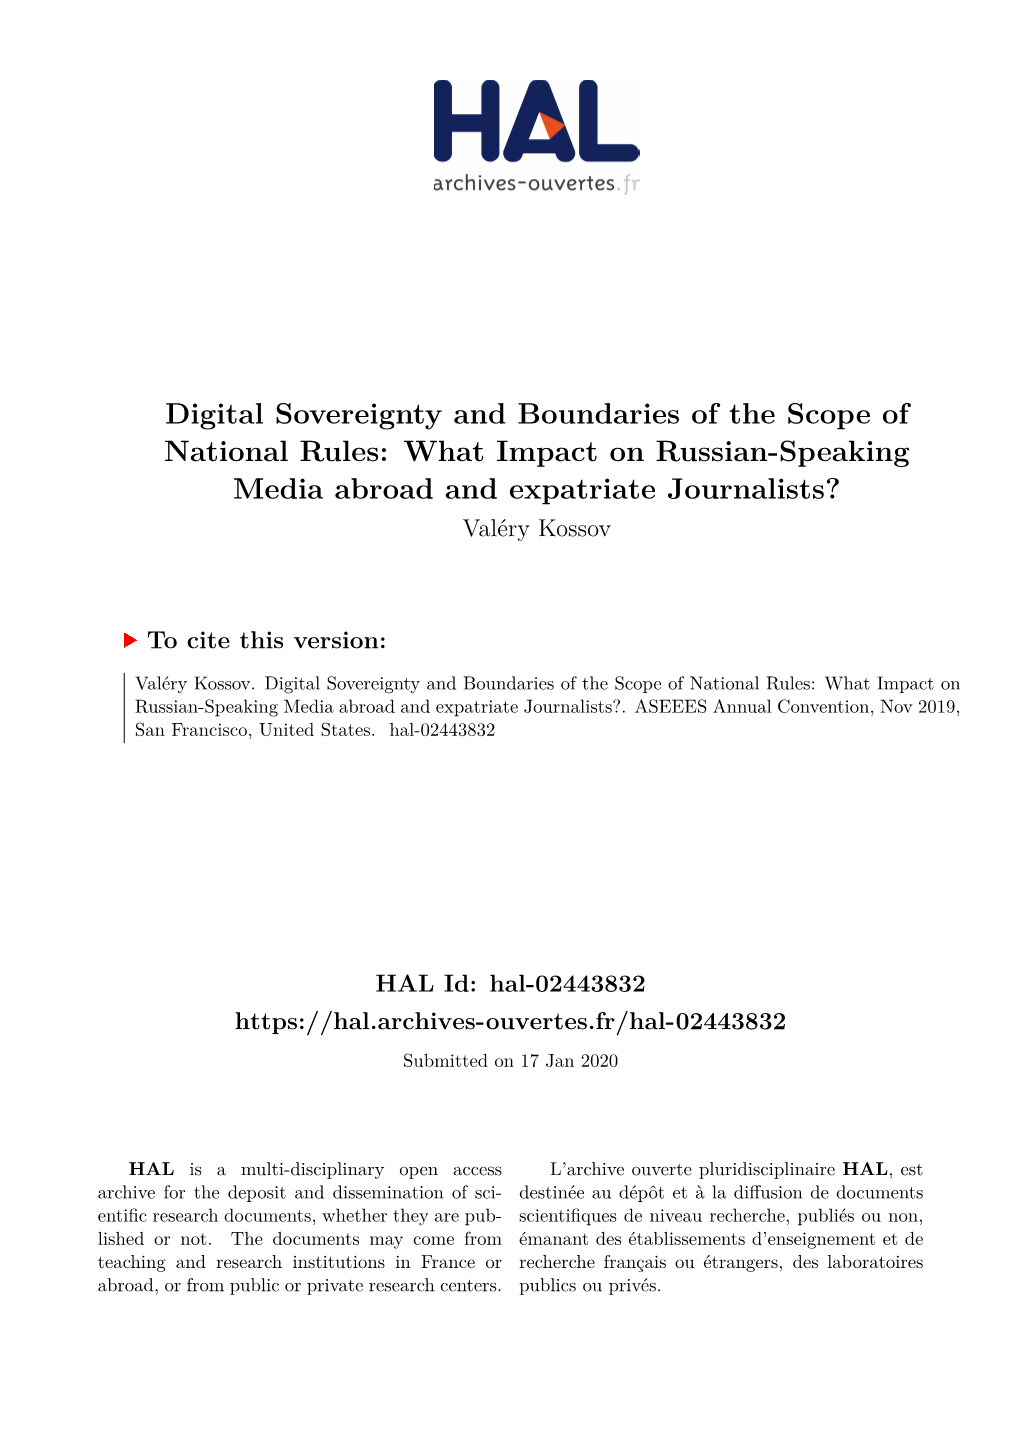 Digital Sovereignty and Boundaries of the Scope of National Rules: What Impact on Russian-Speaking Media Abroad and Expatriate Journalists? Valéry Kossov